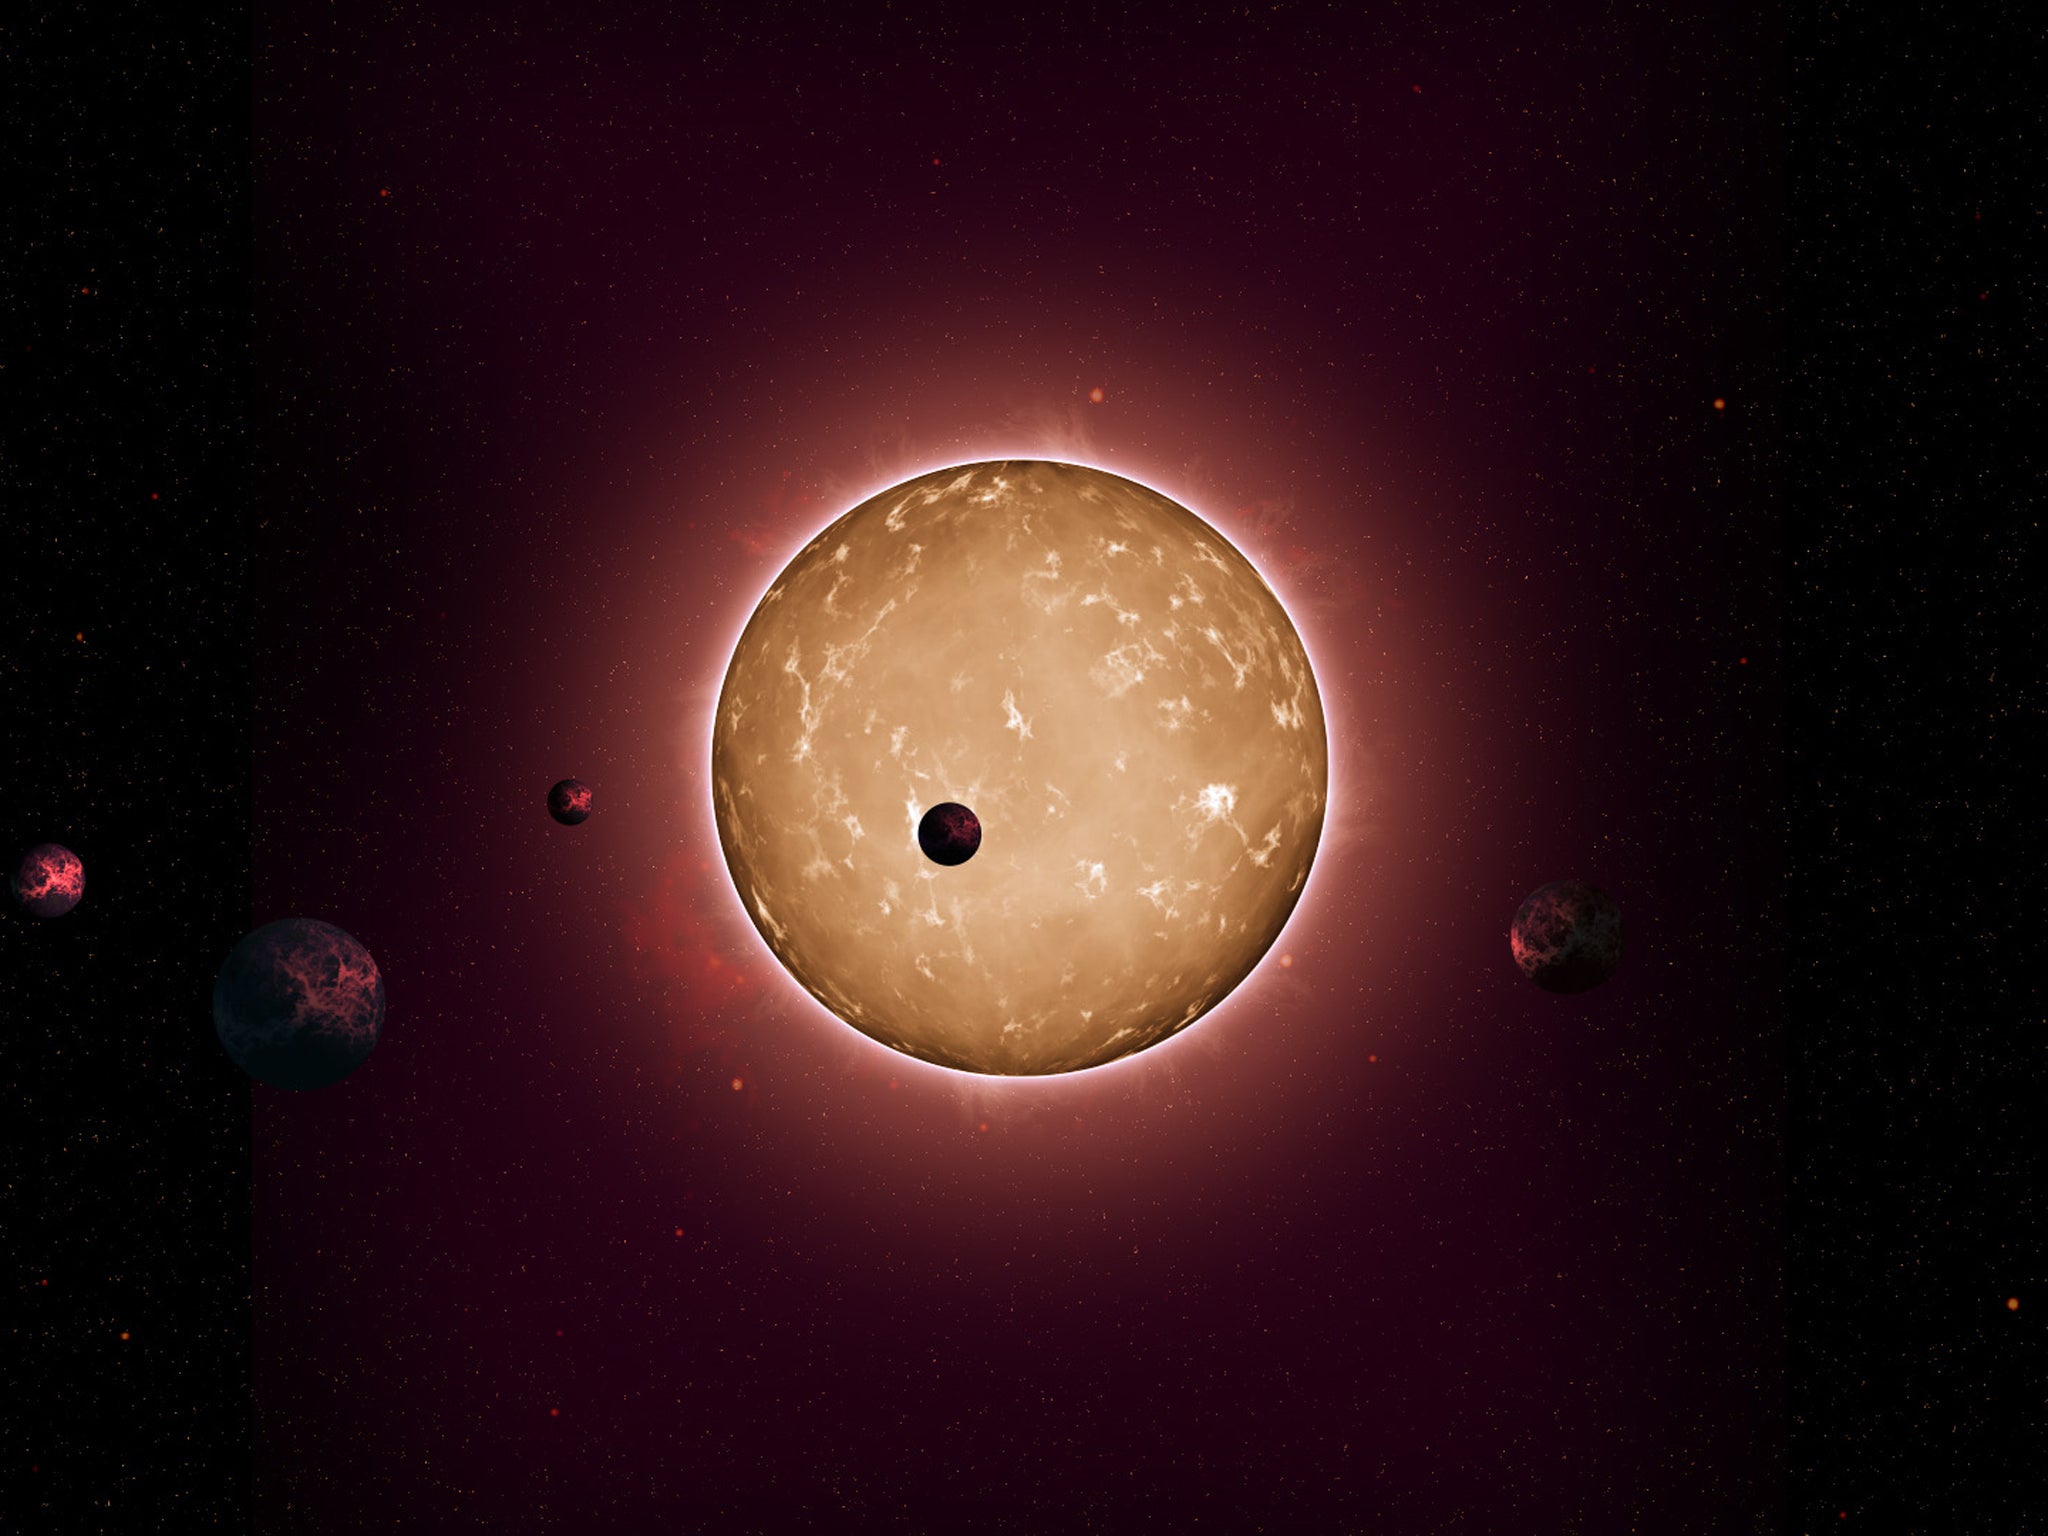 Kepler-444 hosts five Earth-sized planets in very compact orbits. The planets were detected from the dimming that occurs when they transit the disc of their parent star, as shown in this artist's conception.